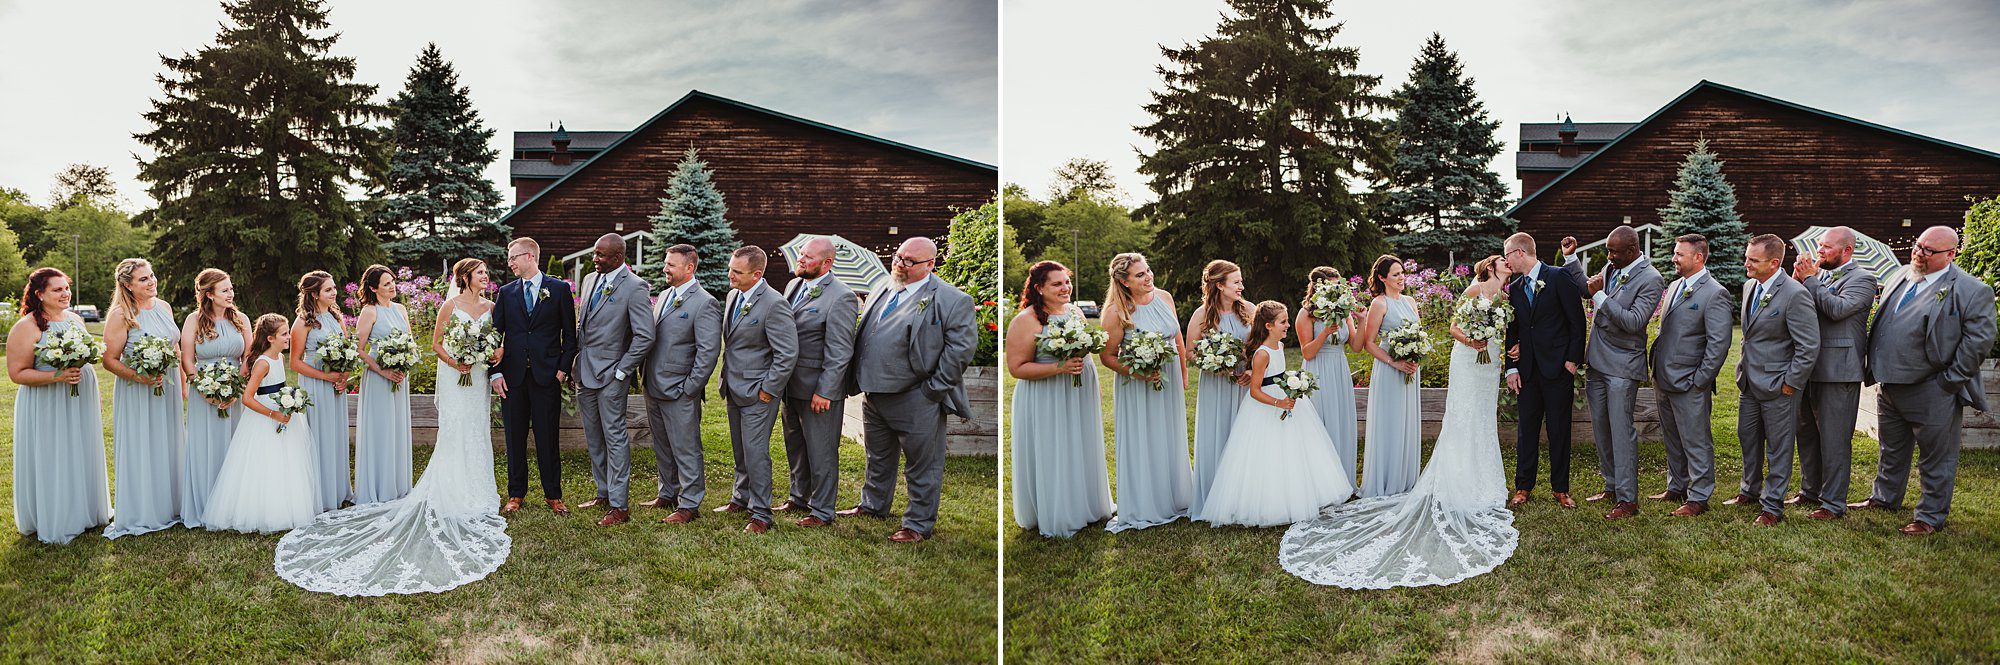 wedding party photos at Fenton Winery and Brewery